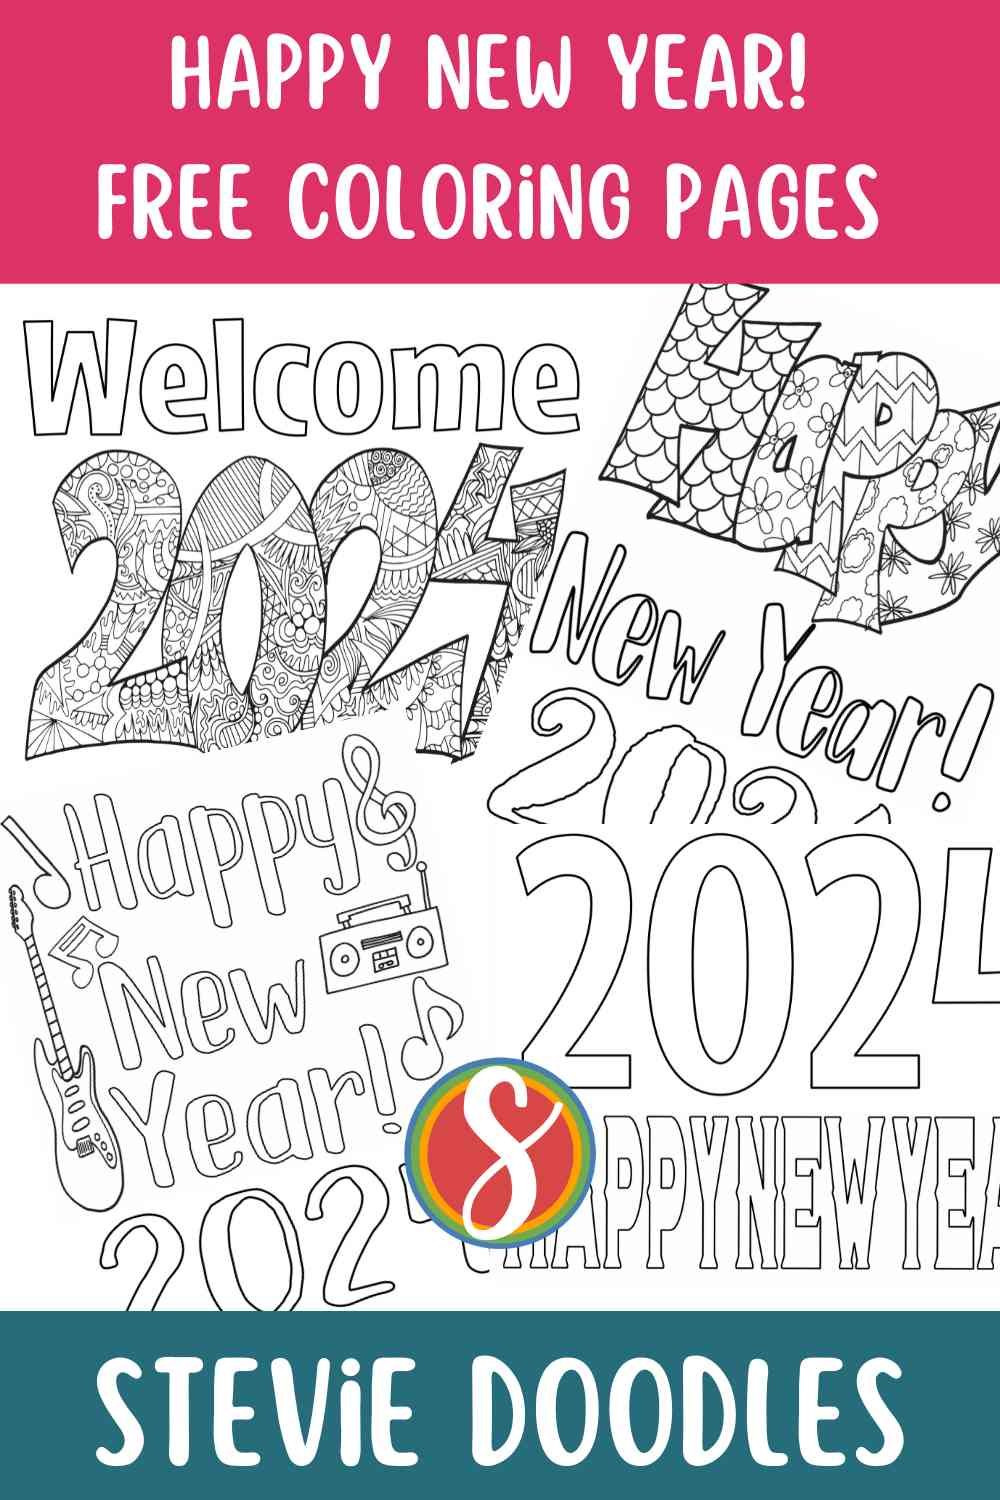 Free happy new years coloring pages â stevie doodles